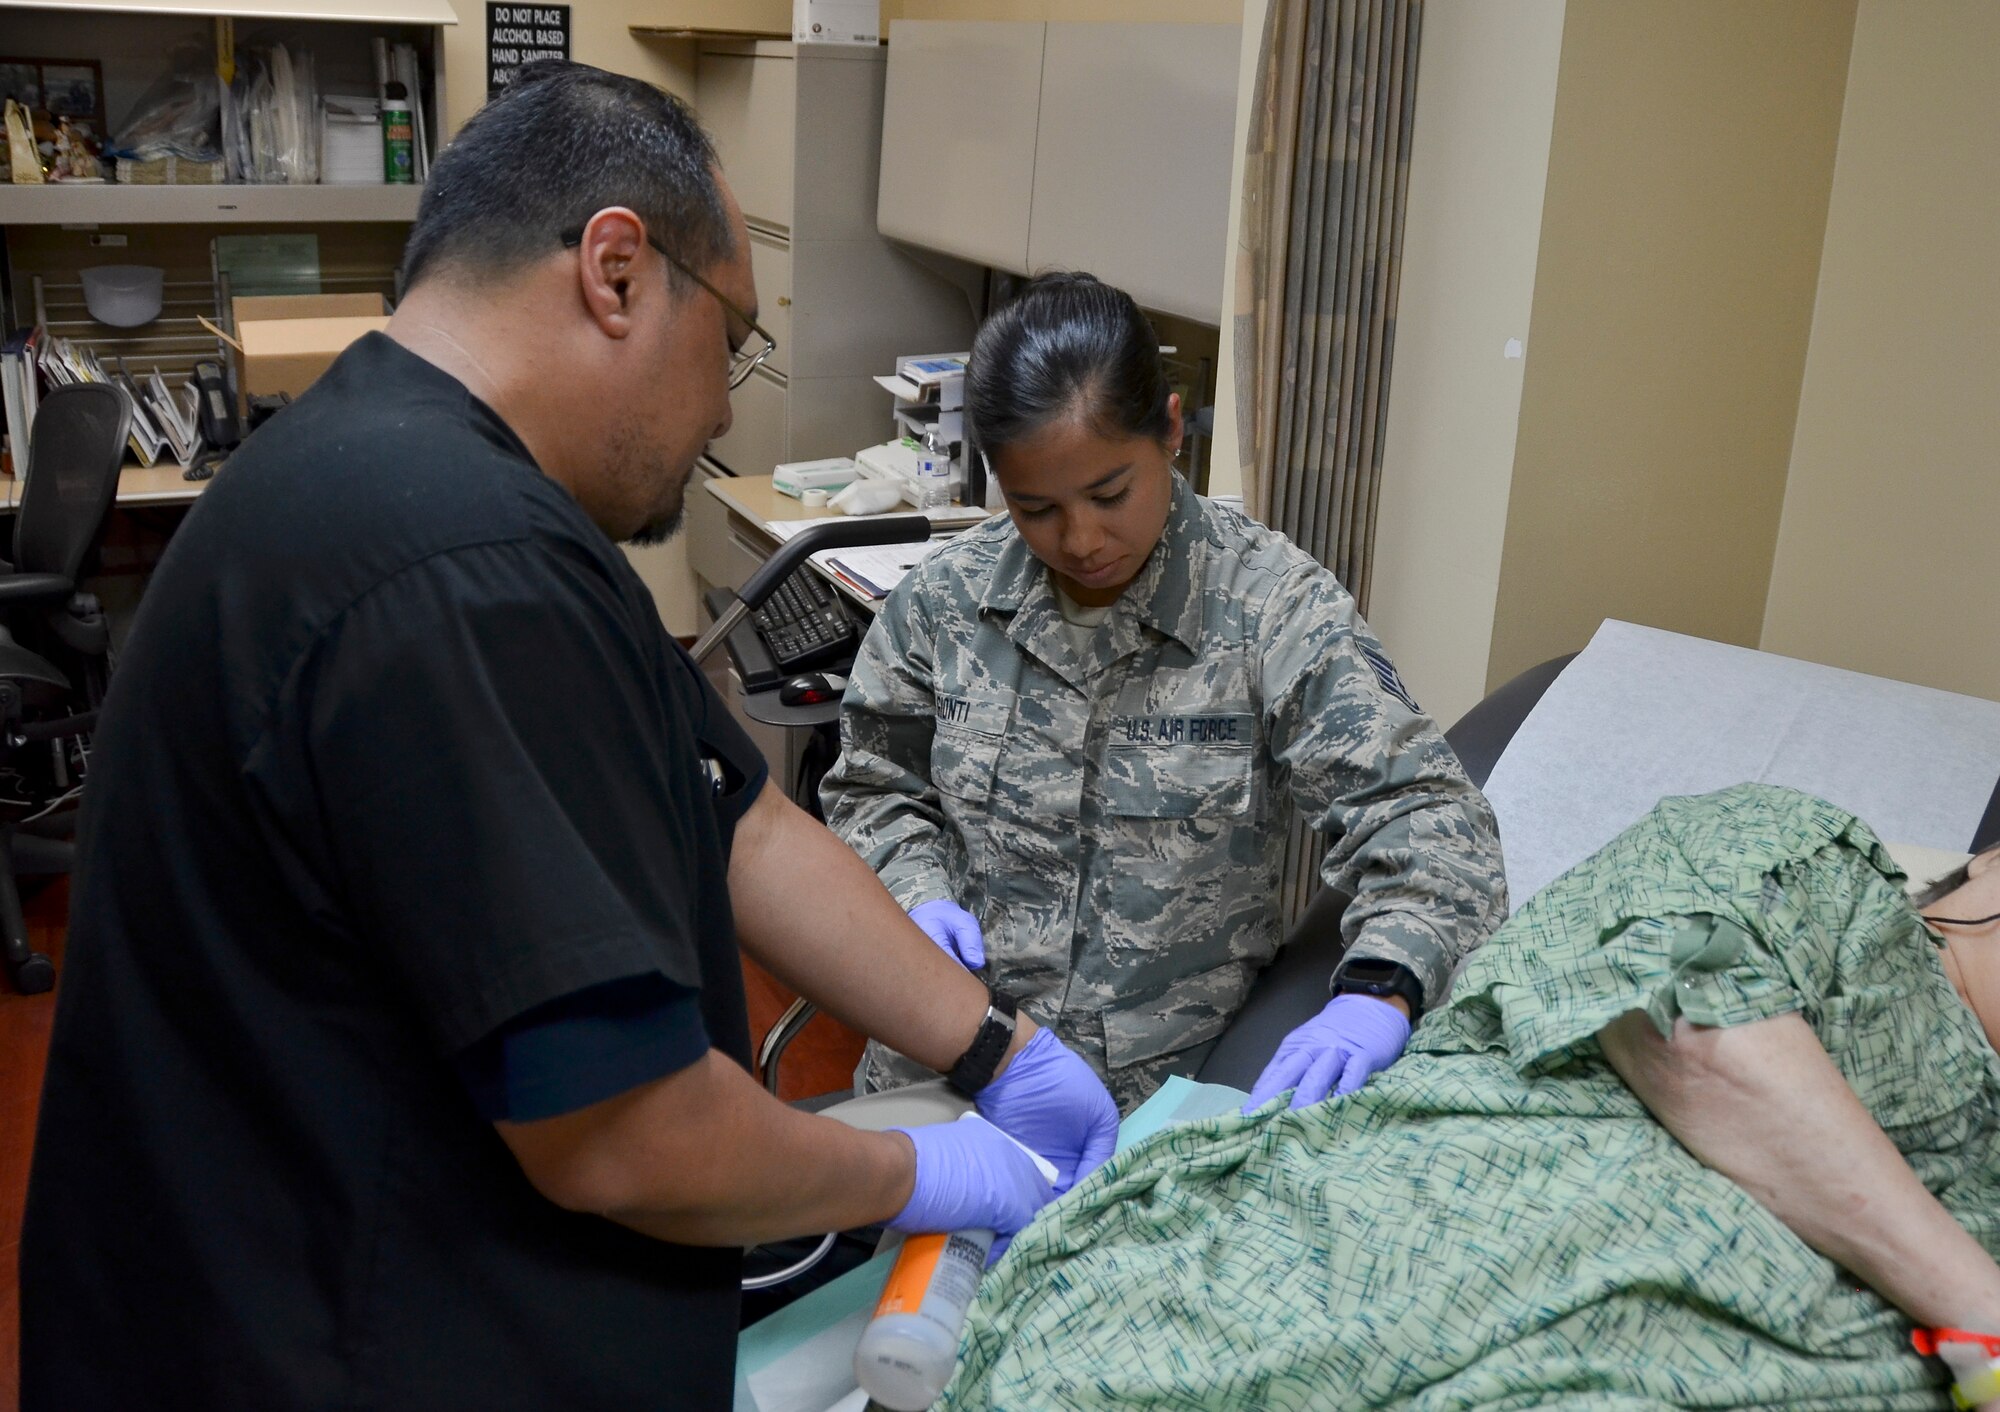 Rodrigo Bautista, health technician (near), Naval Medical Center San Diego, and Staff Sgt. Megan Gionti, medical technician, 117th Medical Group, sanitize a patient's wound in the Naval Medical Center San Diego Wound Care Clinic, in San Diego, Calif., June 27, 2016.  The 117 MDG trained with the U.S. Navy at Naval Medical Center San Diego.  The training included Airmen being implemented in real world U.S. Naval operations.  (U.S. Air National Guard photo by Staff Sgt. Jeremy Farson/Released)   